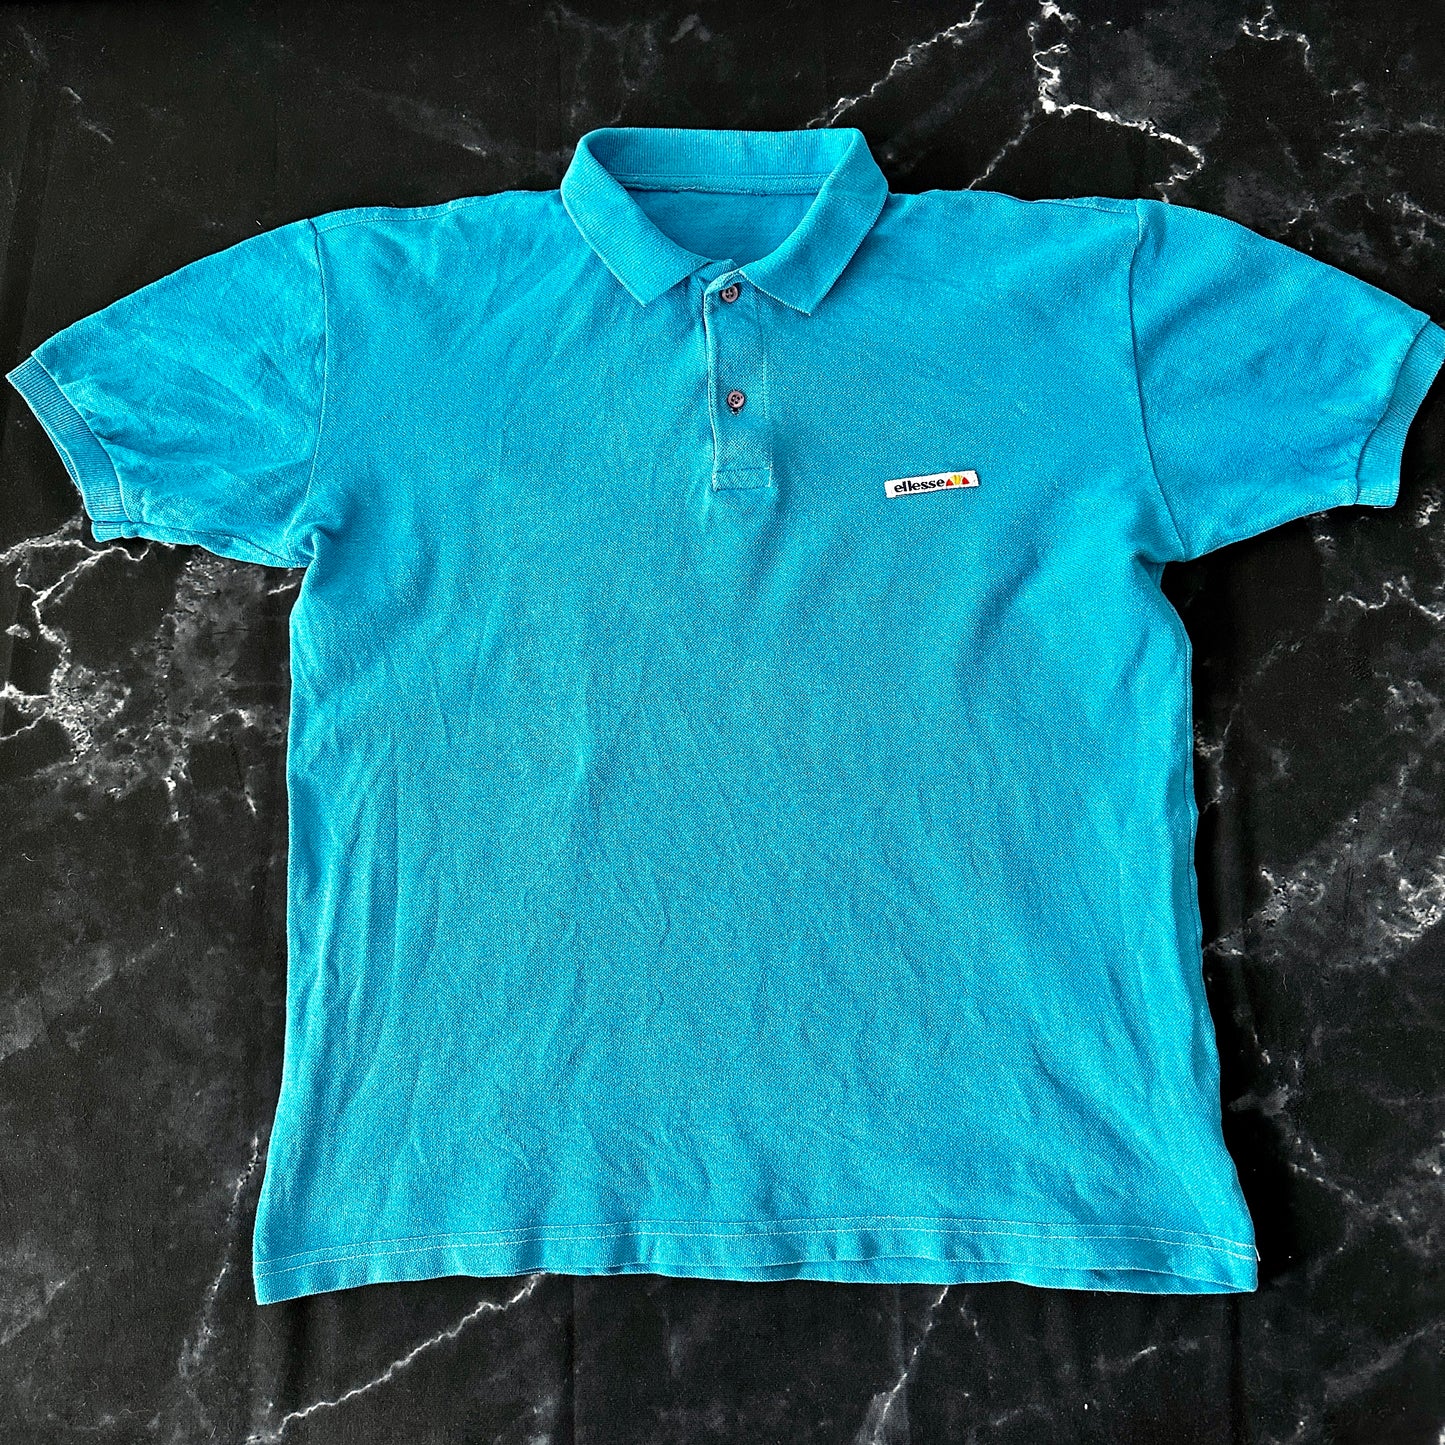 Ellesse Vintage 80s Polo Shirt - M - Made in Italy